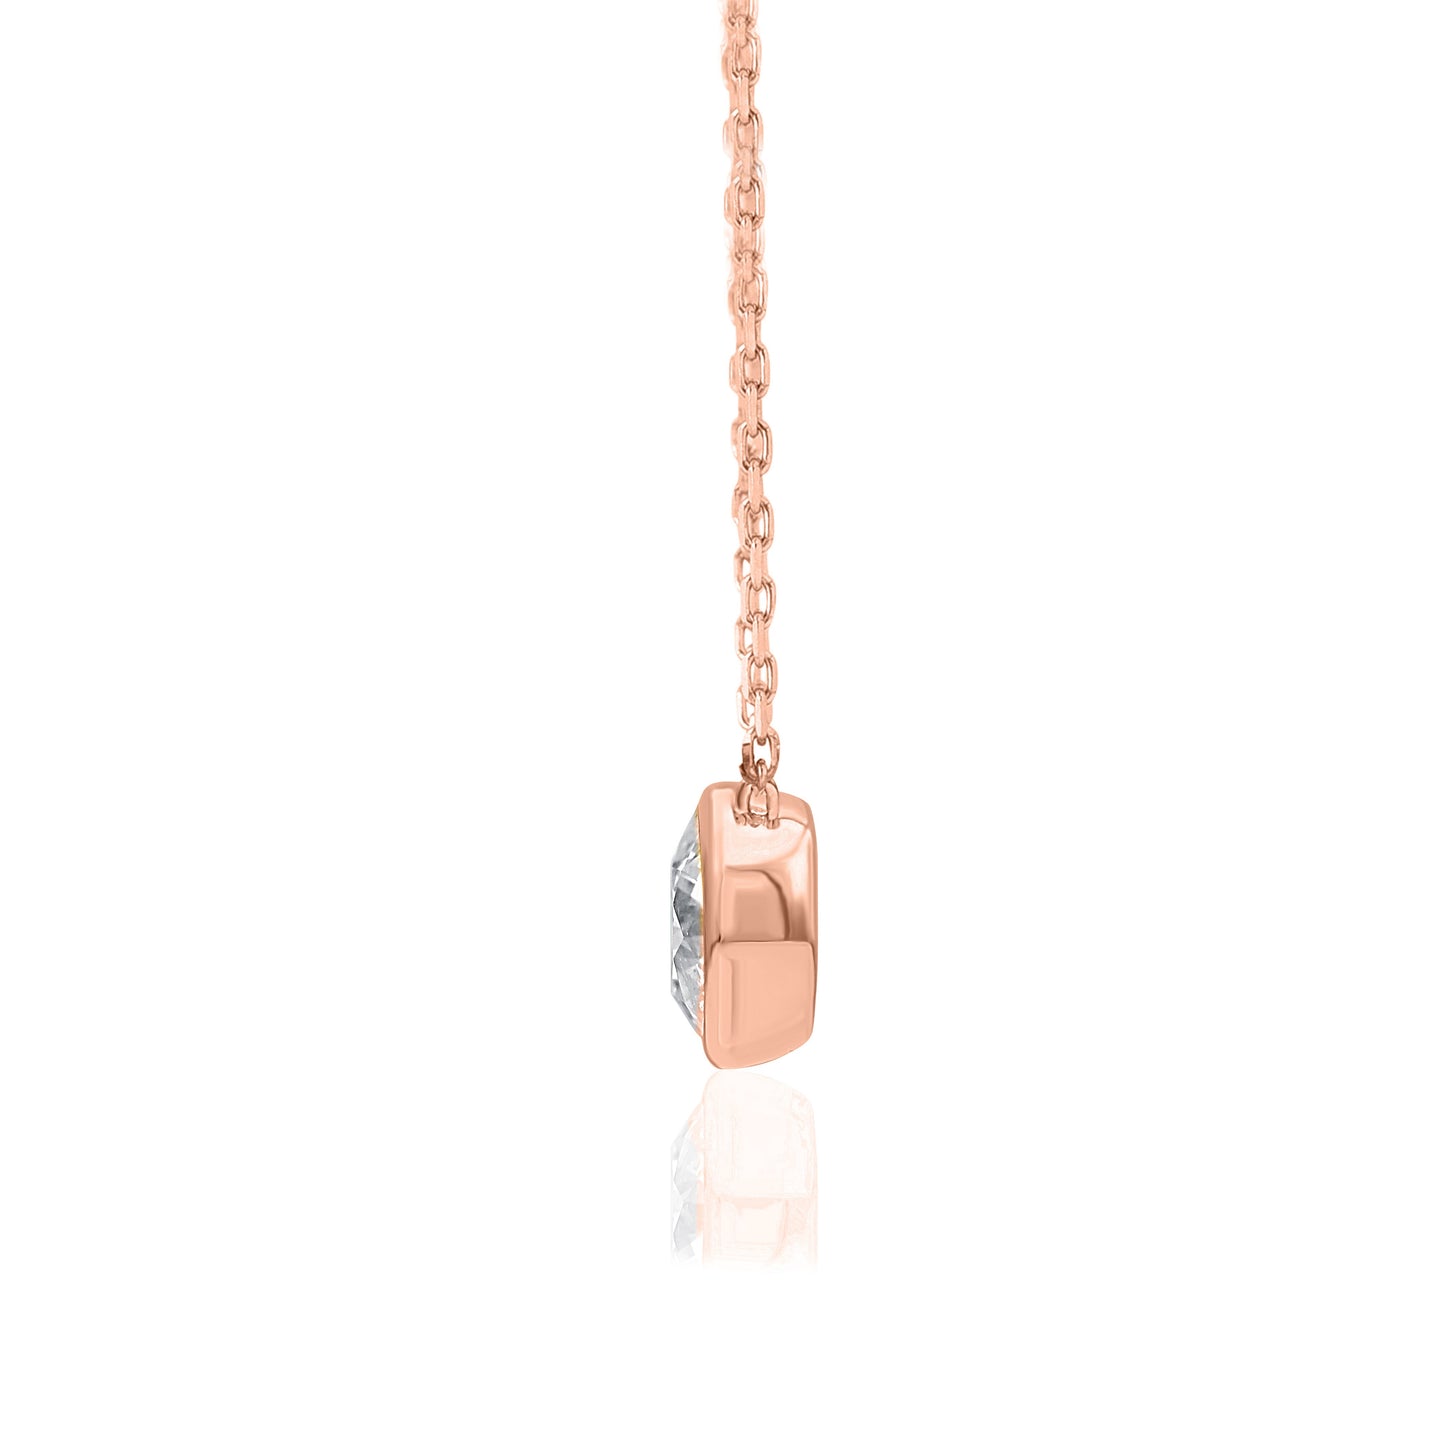 1/3 Carat Natural Diamond Halo Pendant Necklace in 10K Gold